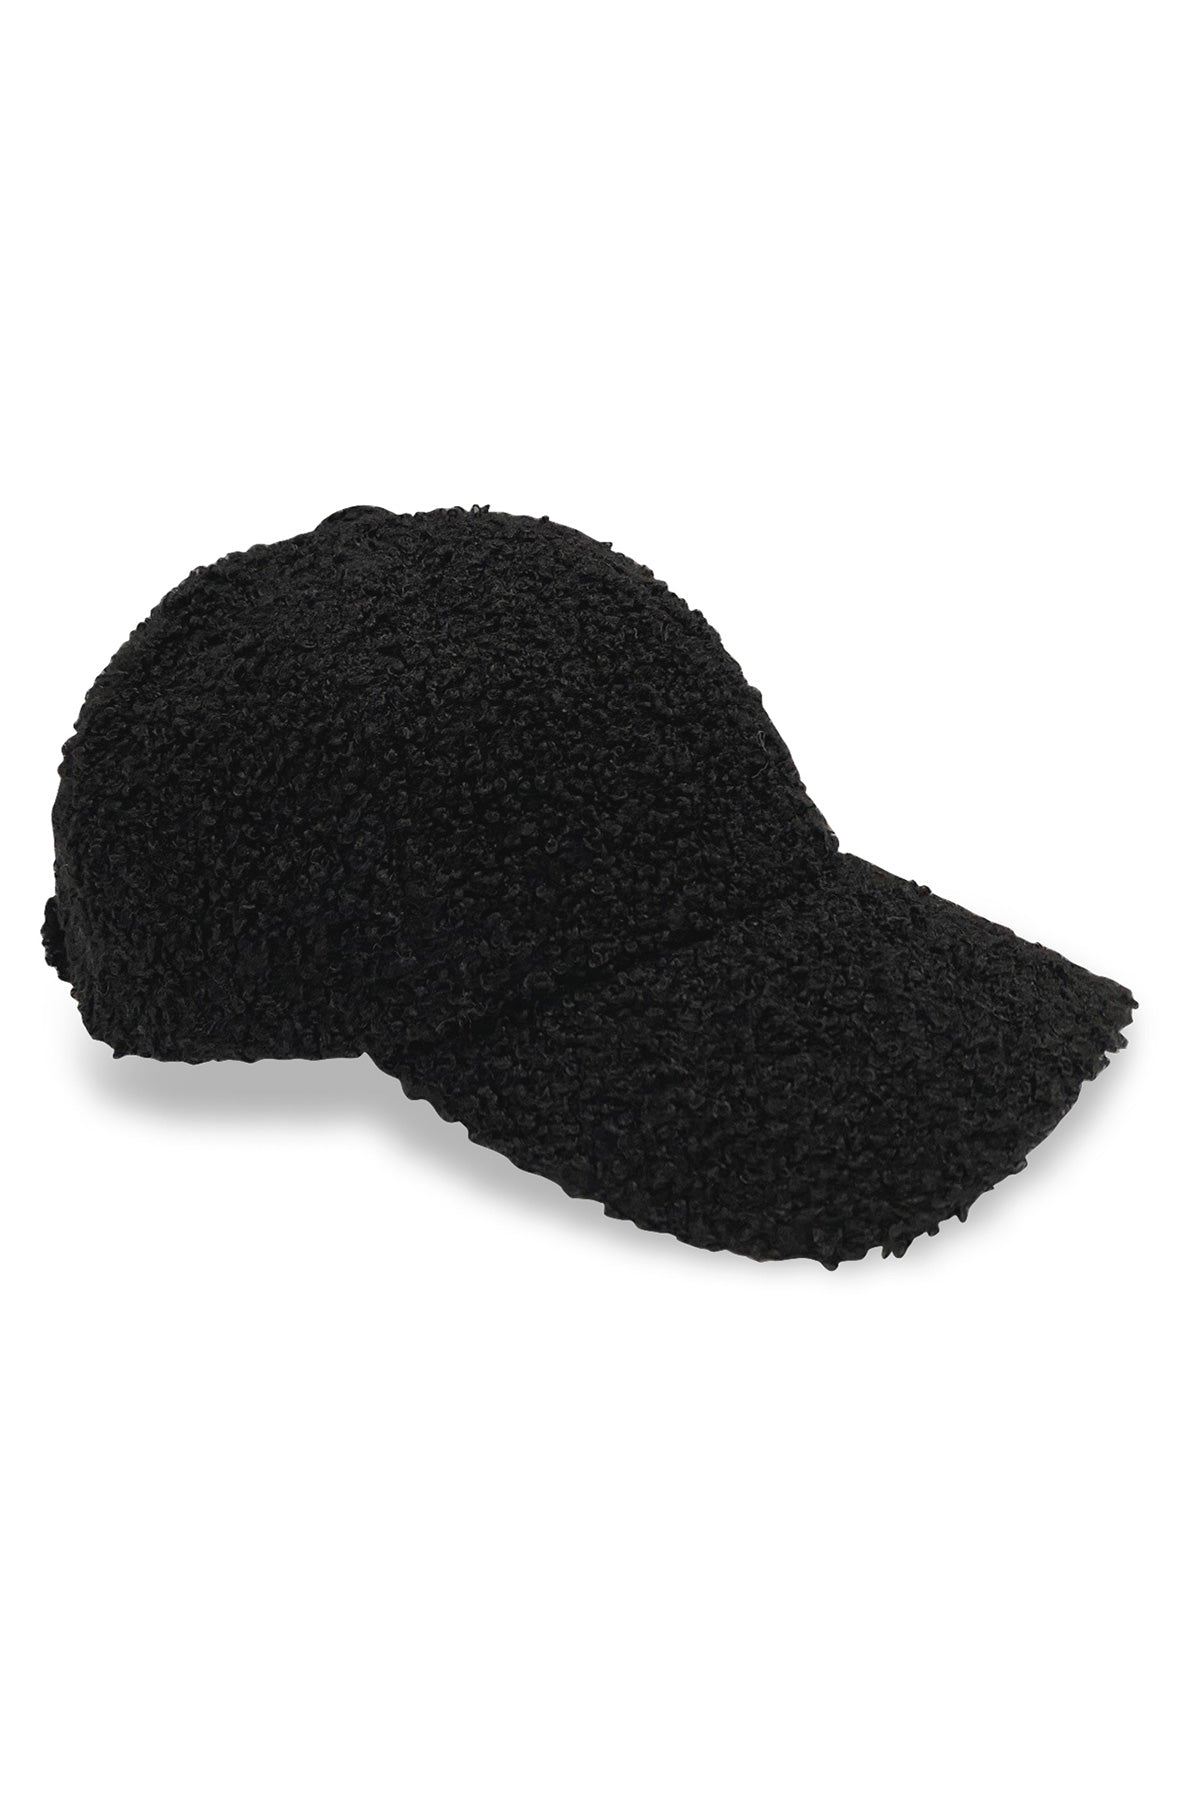   A black SHERPA CAP by Velvet by Graham & Spencer featuring a eco faux-sherpa lining, perfect for cold-weather occasions, on a white background. 